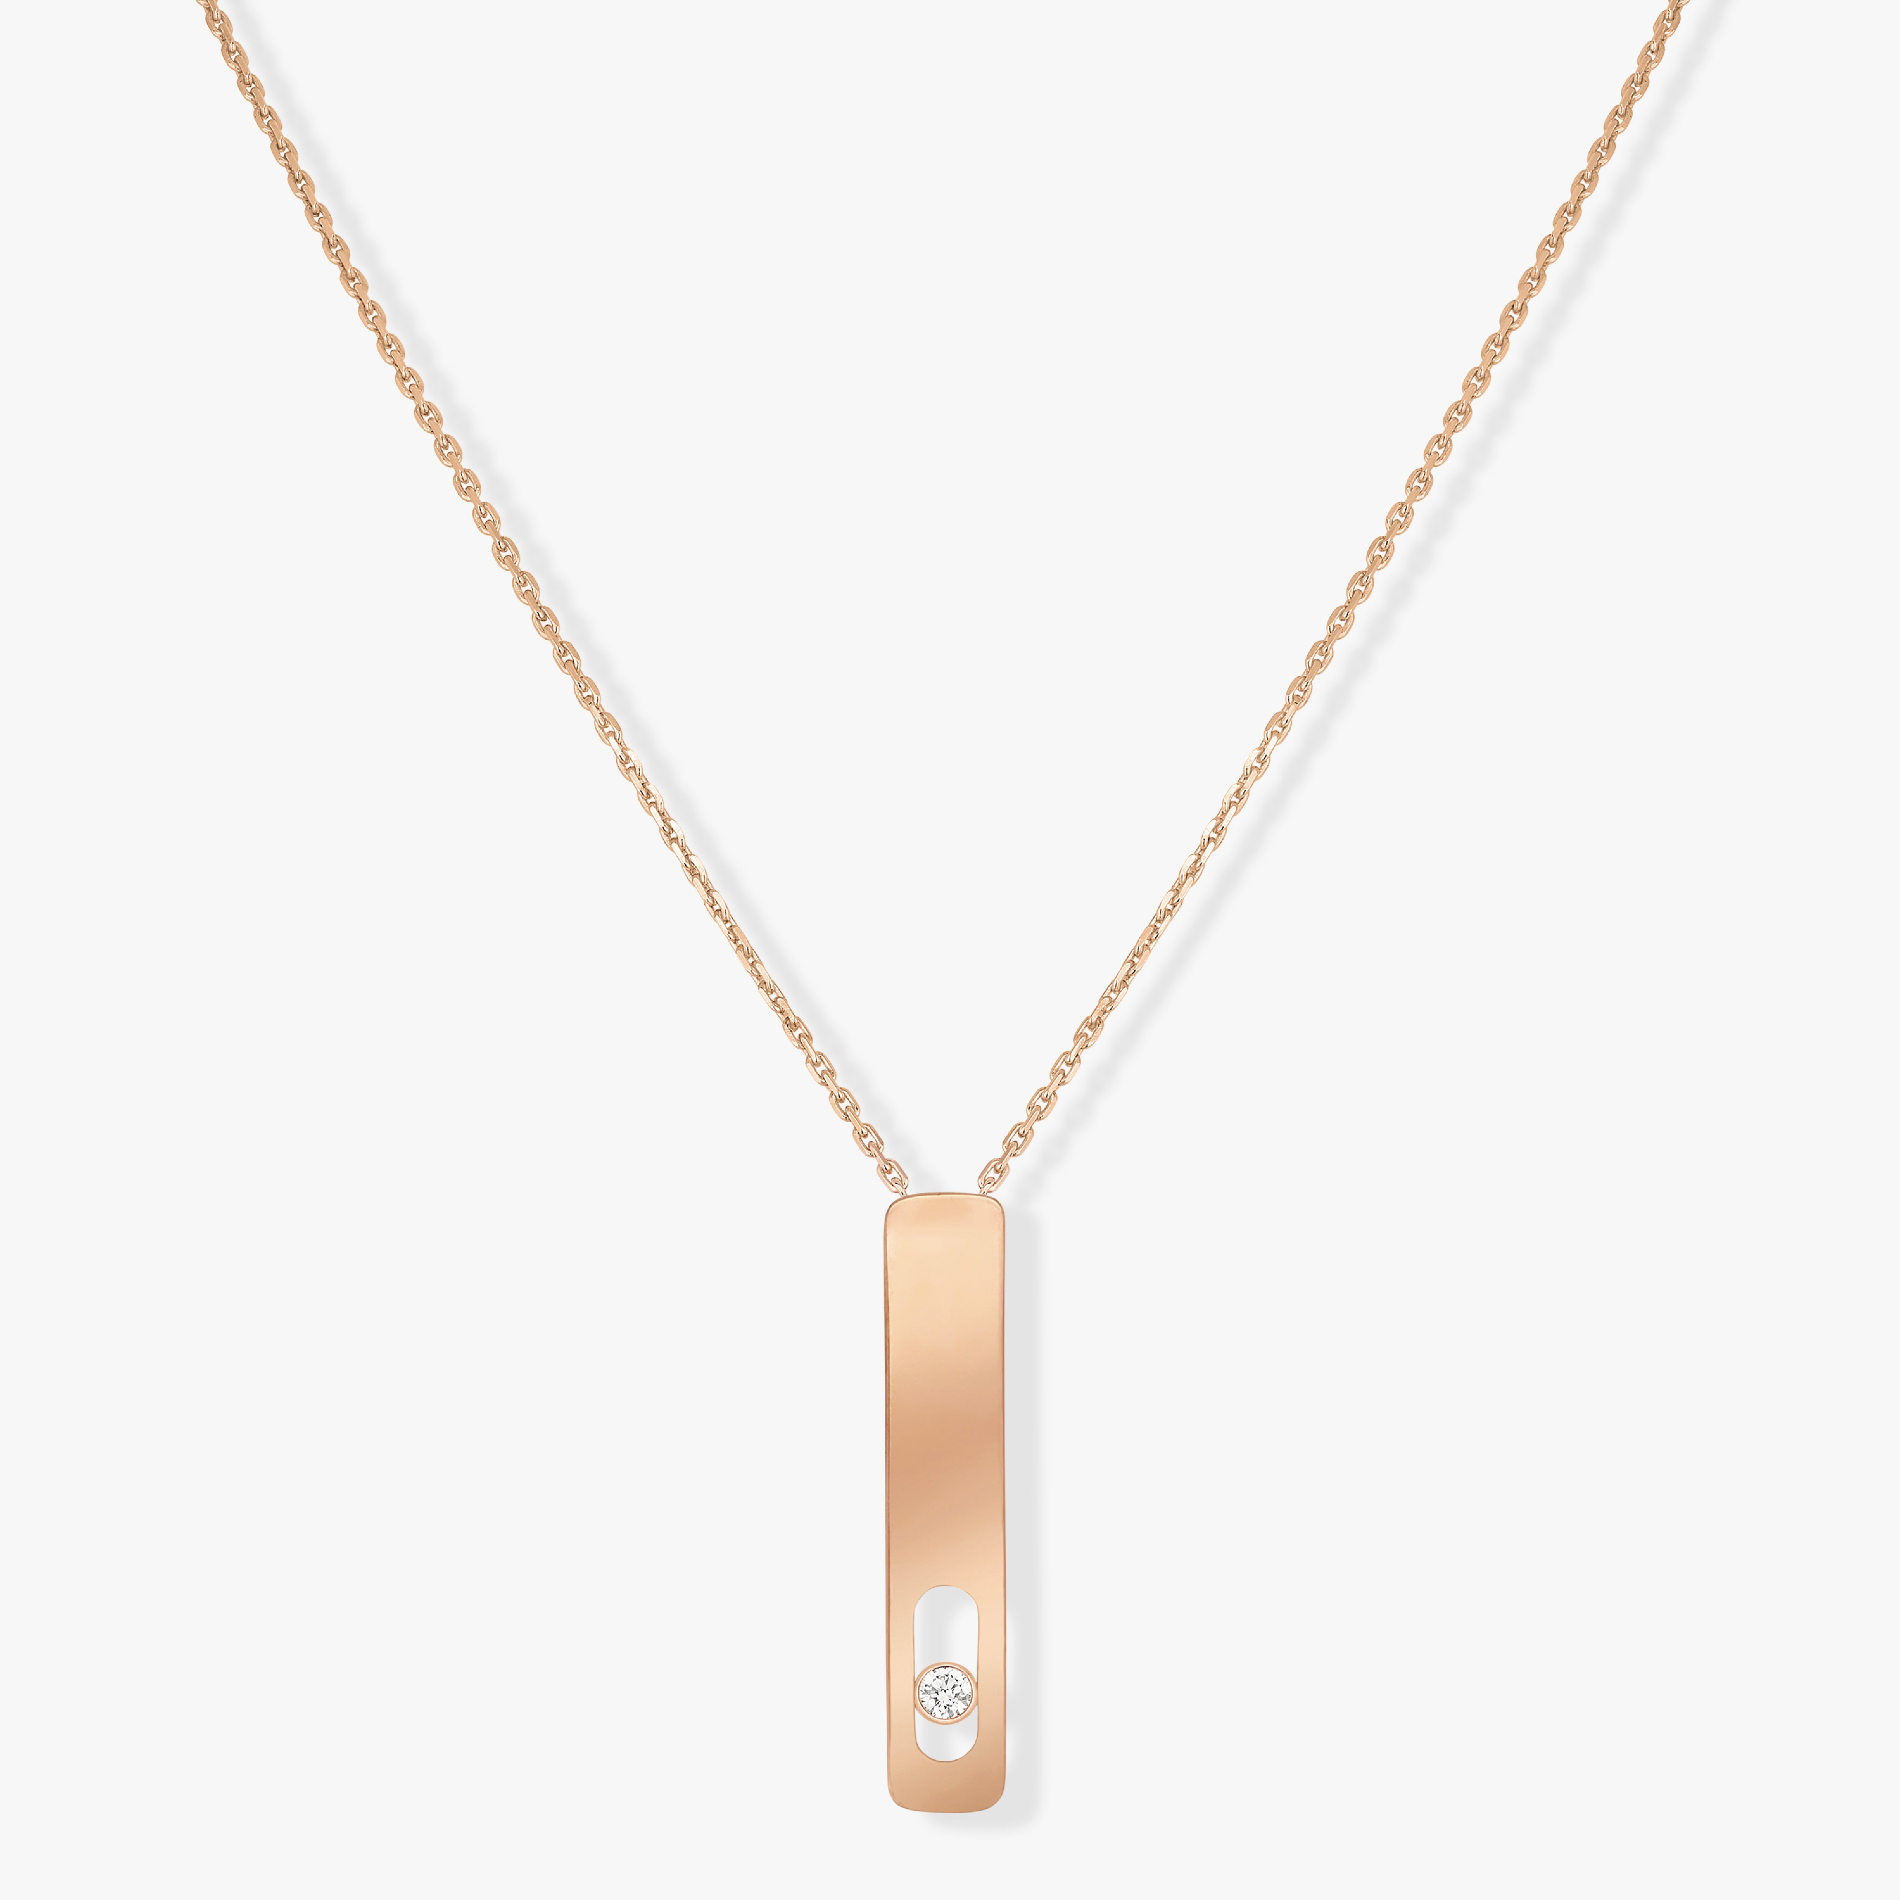 My First Diamond LM Pink Gold For Her Diamond Necklace 10039-PG